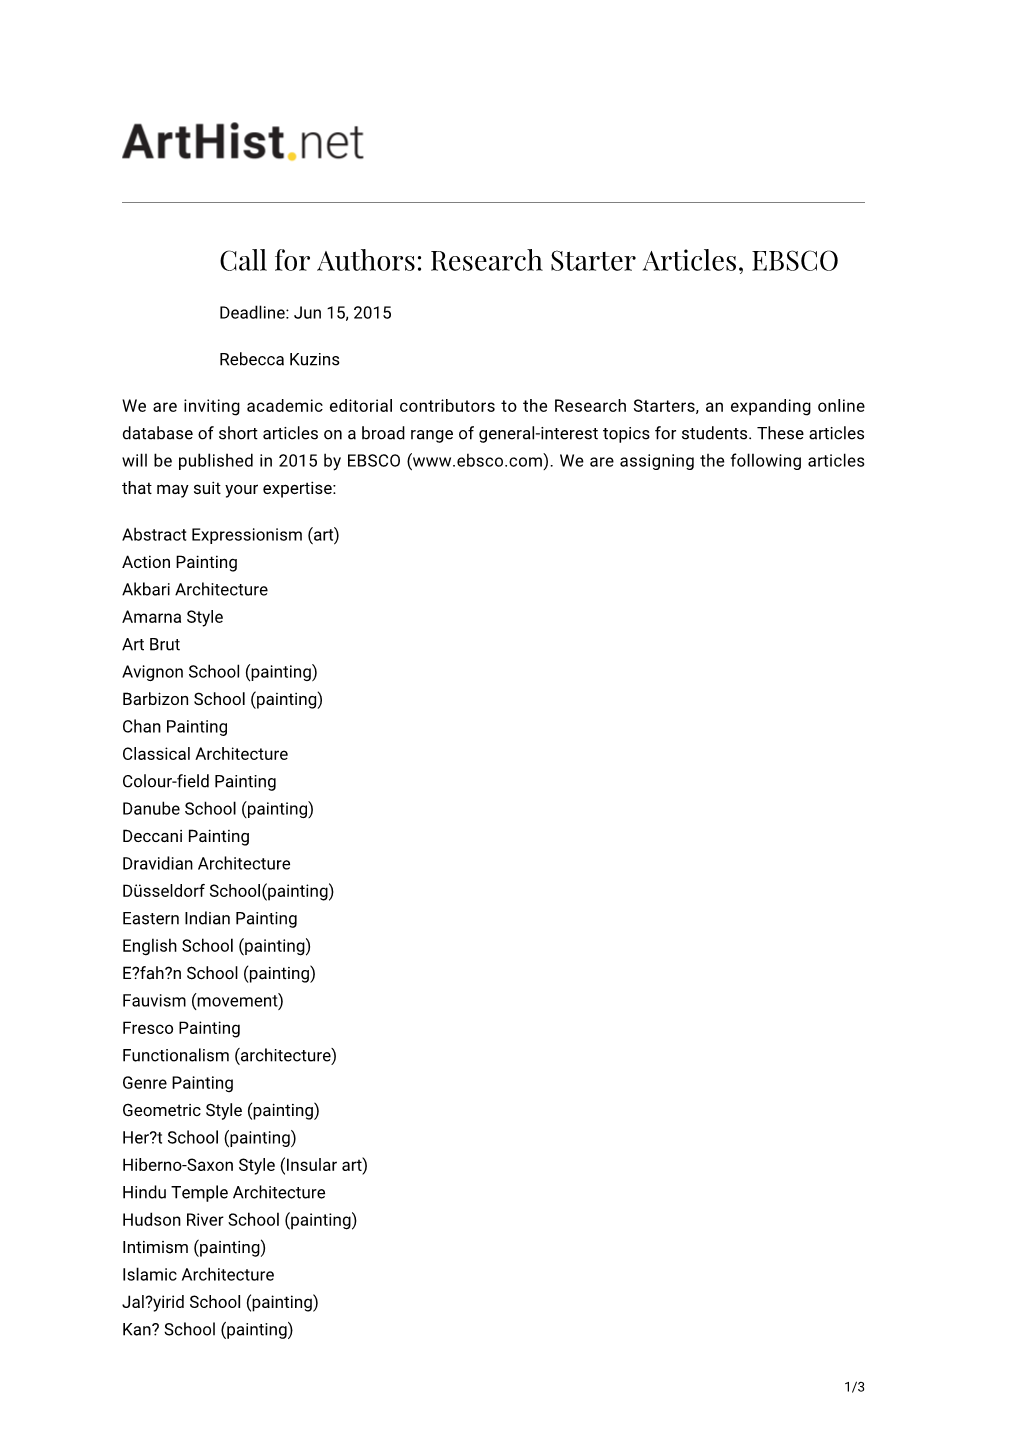 Call for Authors: Research Starter Articles, EBSCO